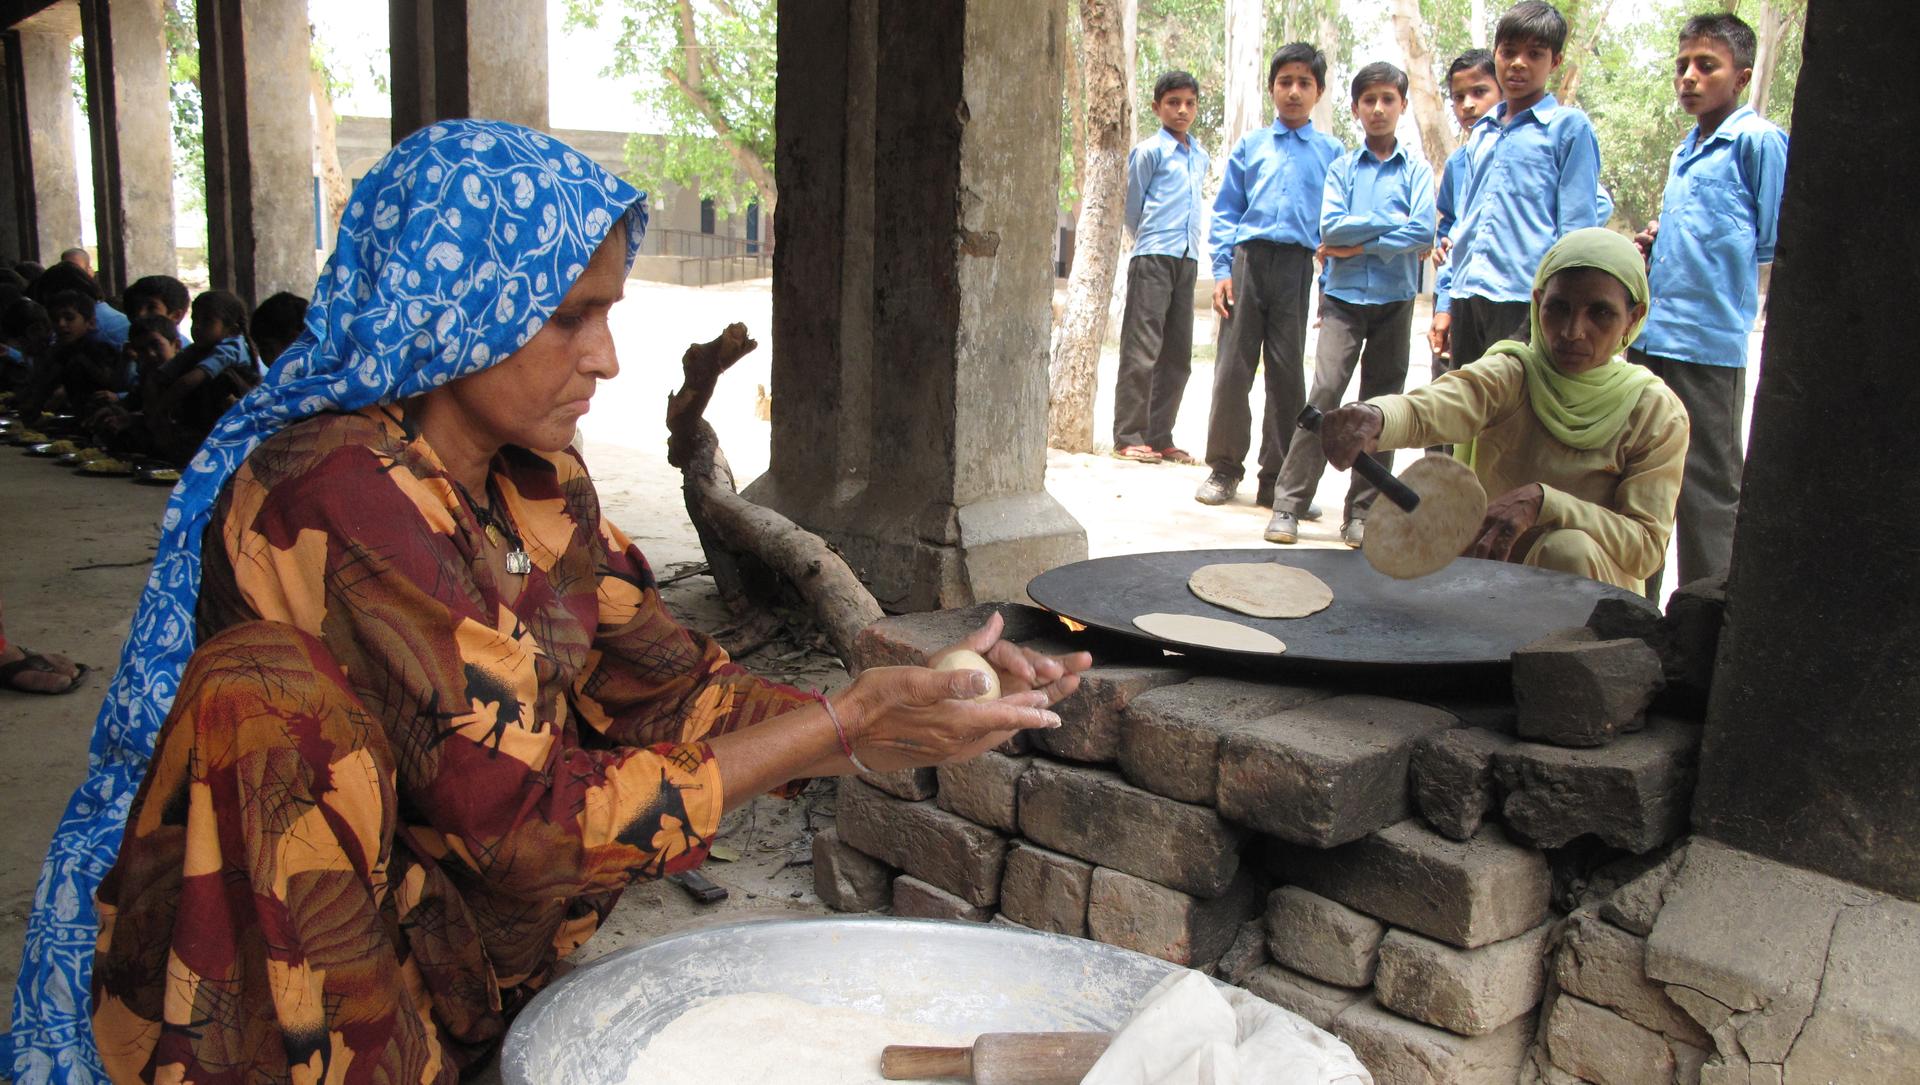 Cooks Beddo and Bimla, make rotis (a wheat flat bread) at a government school in a village  called Bawani Khera, in south central Haryana. The menu for the day is roti and a vegetable dish.